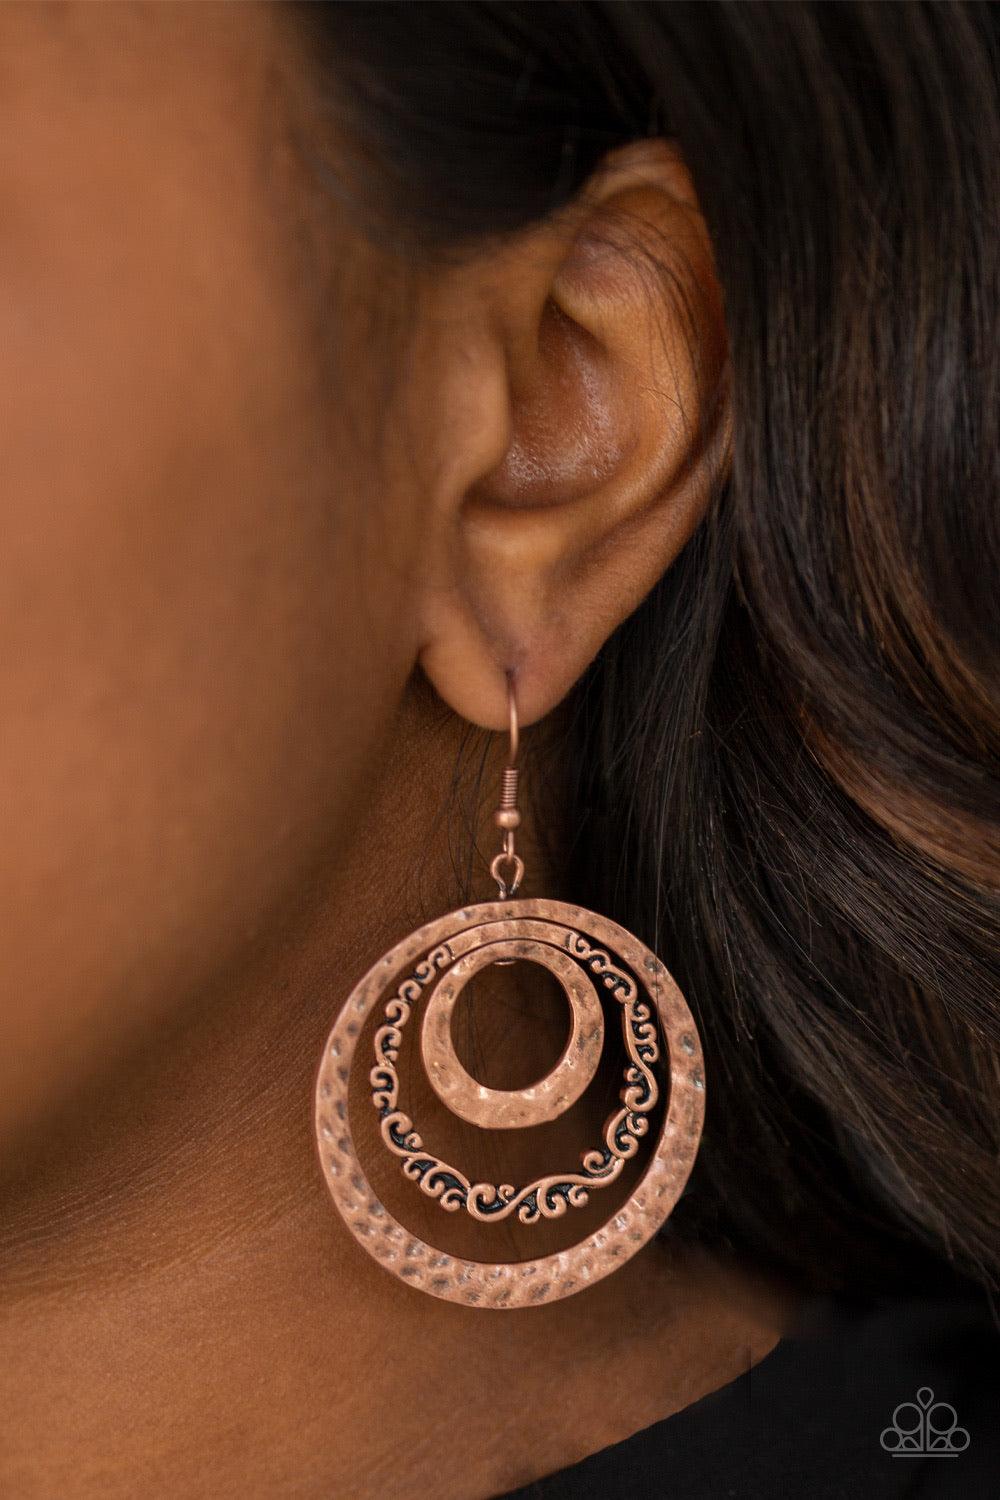 Paparazzi Accessories Out Of Control Shimmer - Copper A collection of hammered and filigree filled copper hoops ripple from the ear, coalescing into a dizzying frame. Earring attaches to a standard fishhook fitting. Jewelry